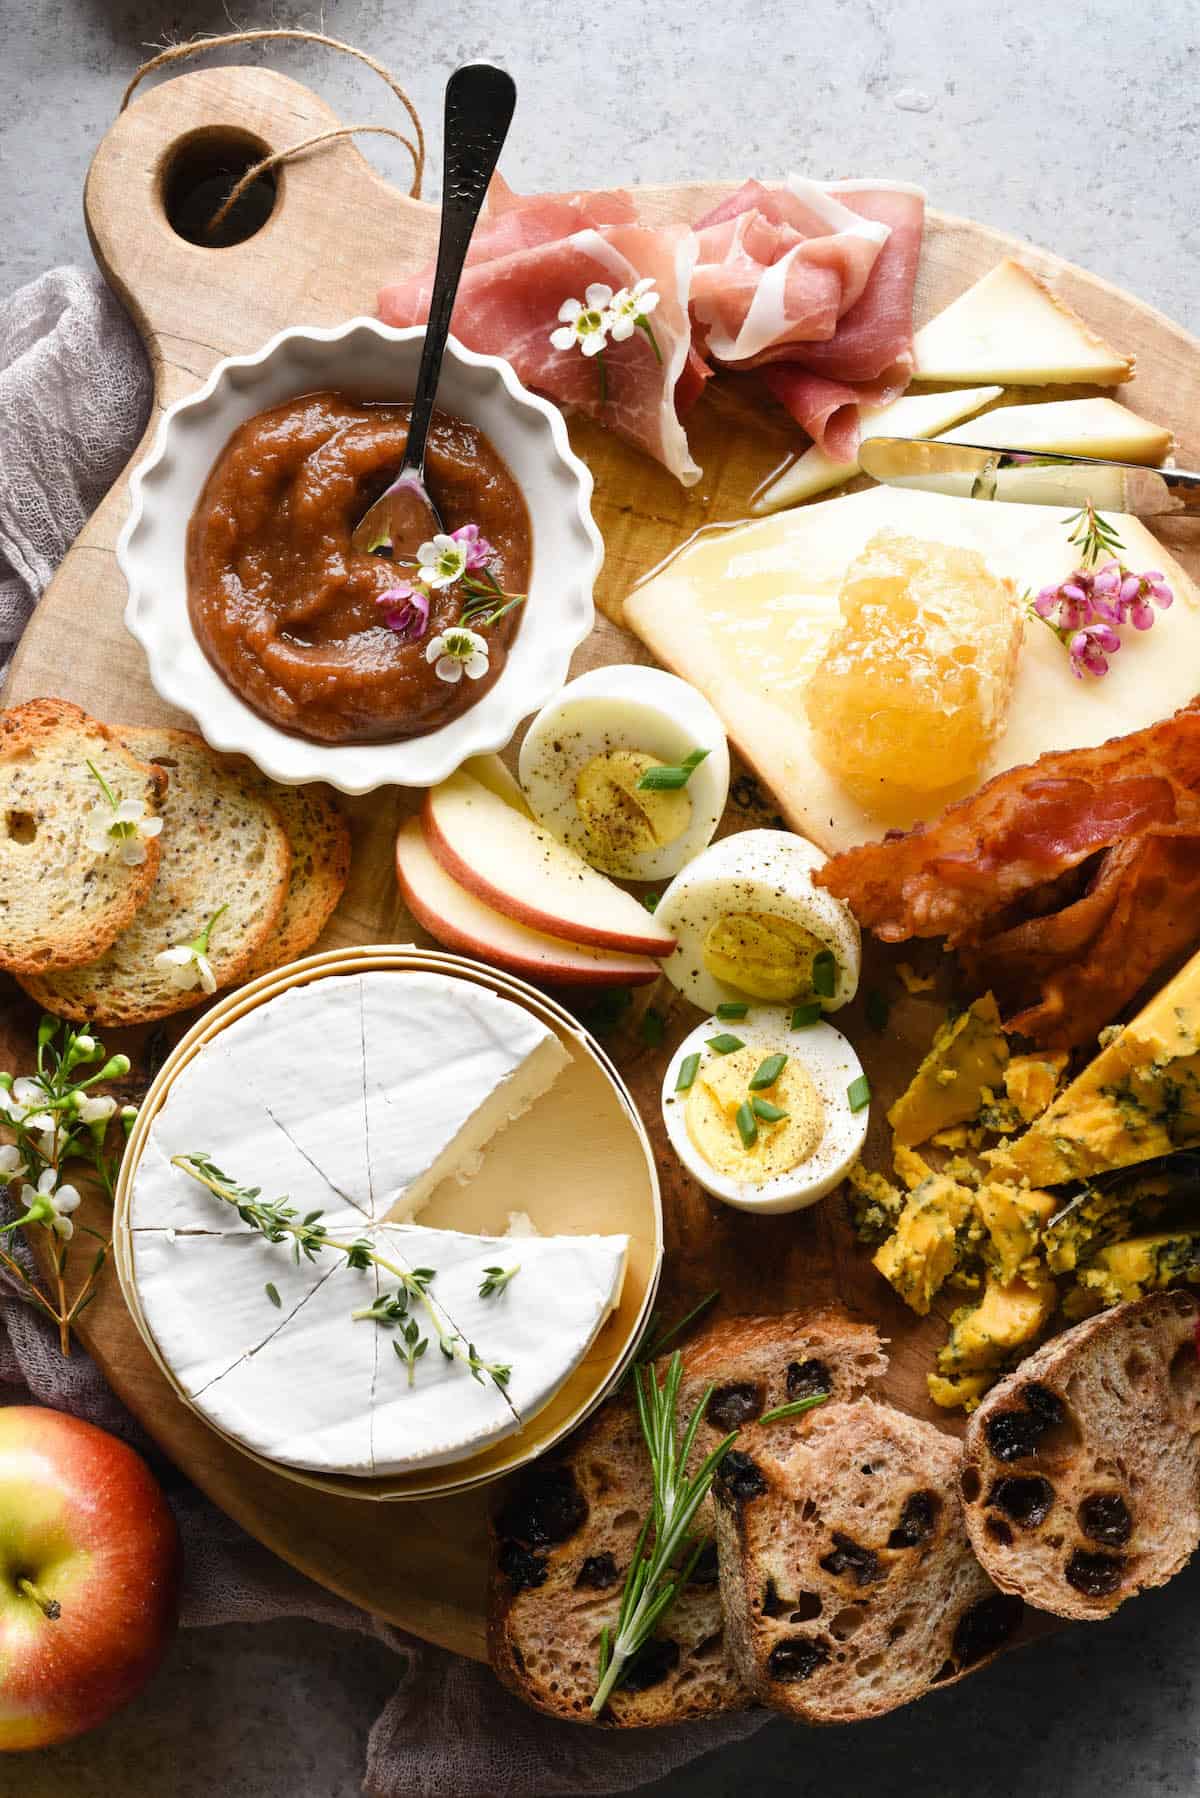 A breakfast charcuterie board arranged on a circular wooden board. Bread, cheese, hard boiled eggs, sliced apples, bacon and prosciutto cover the board.